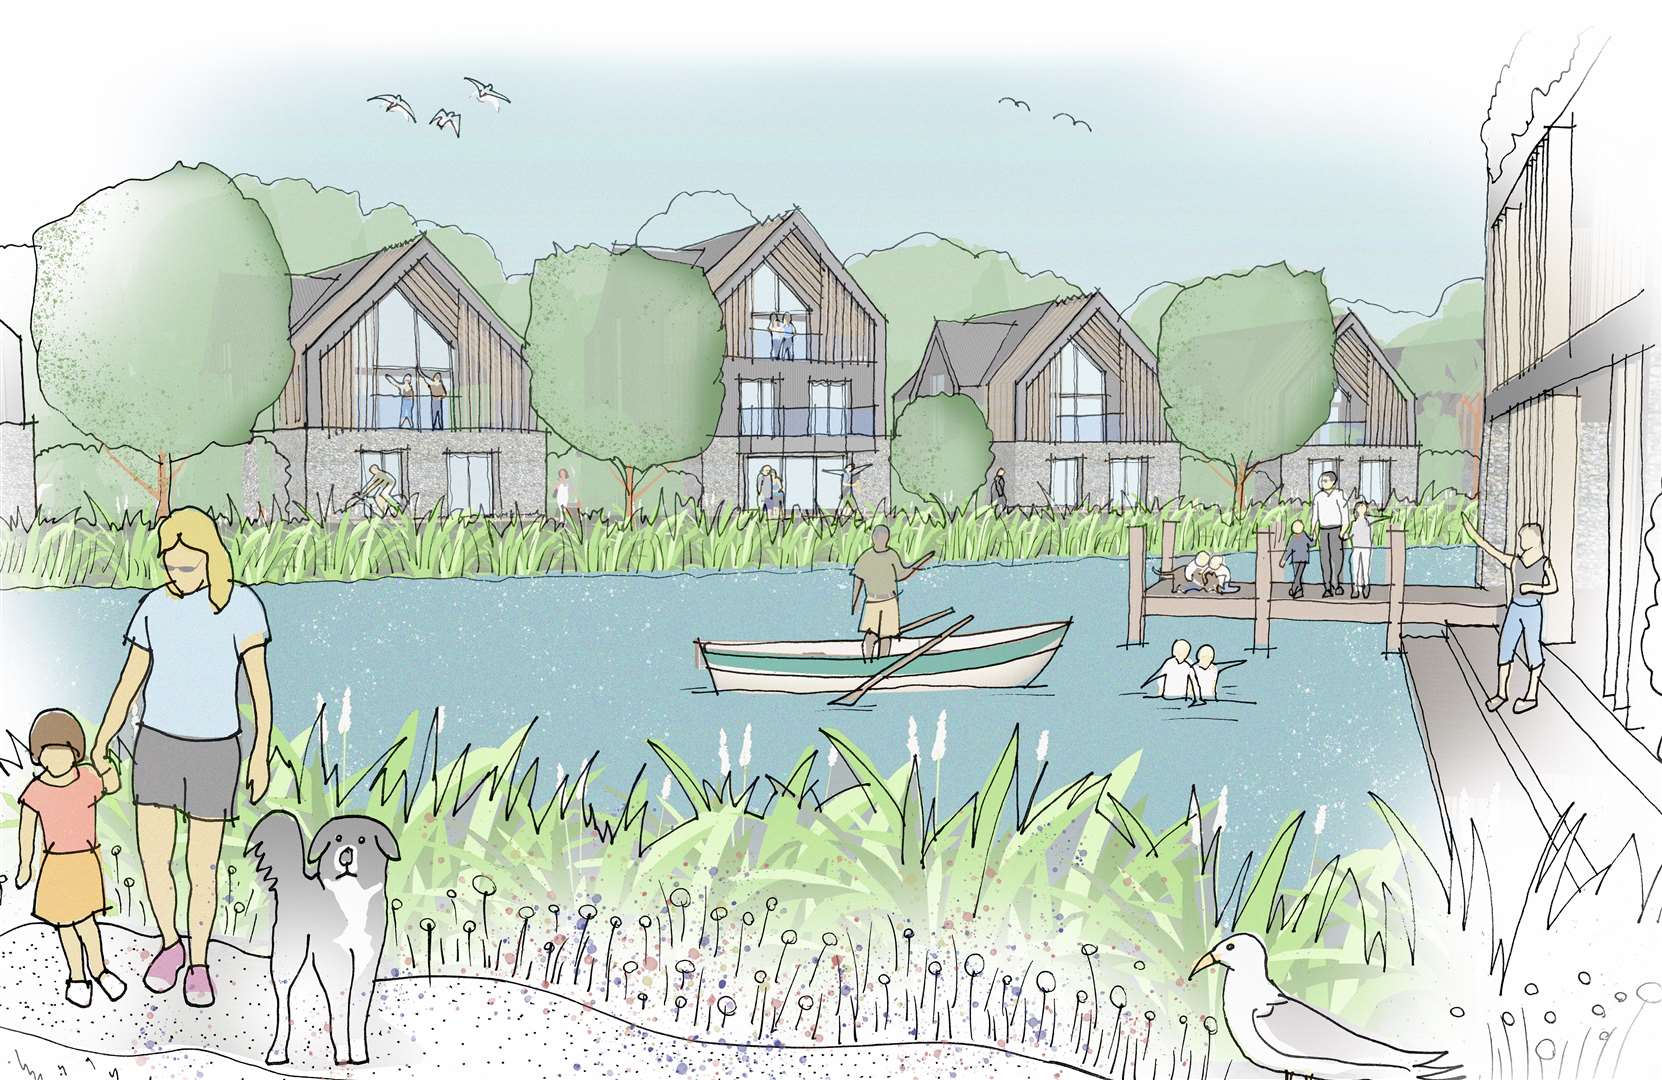 Drawing showing how the golf course bid could look if plans go ahead. Holiday homes and a boating lake are proposed